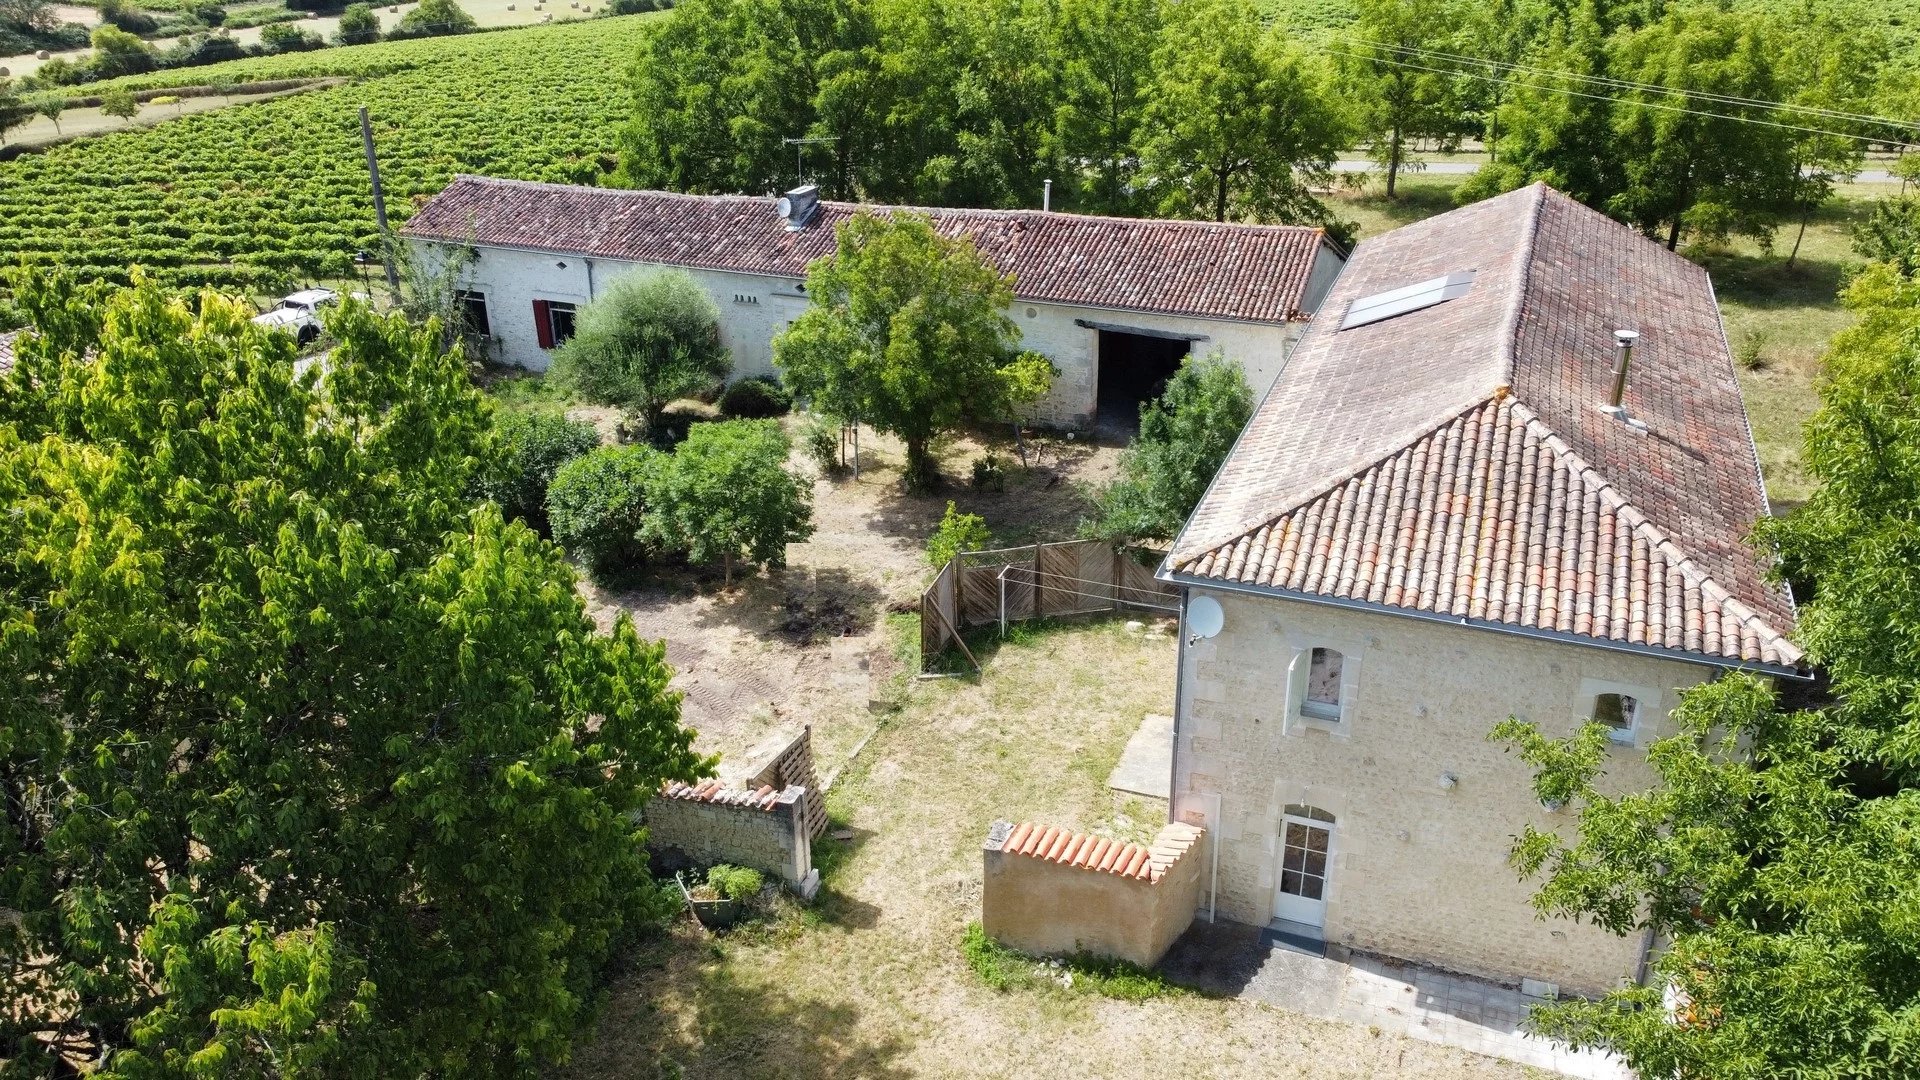 Farmhouse with two dwellings and outbuildings set in over one hectare of land